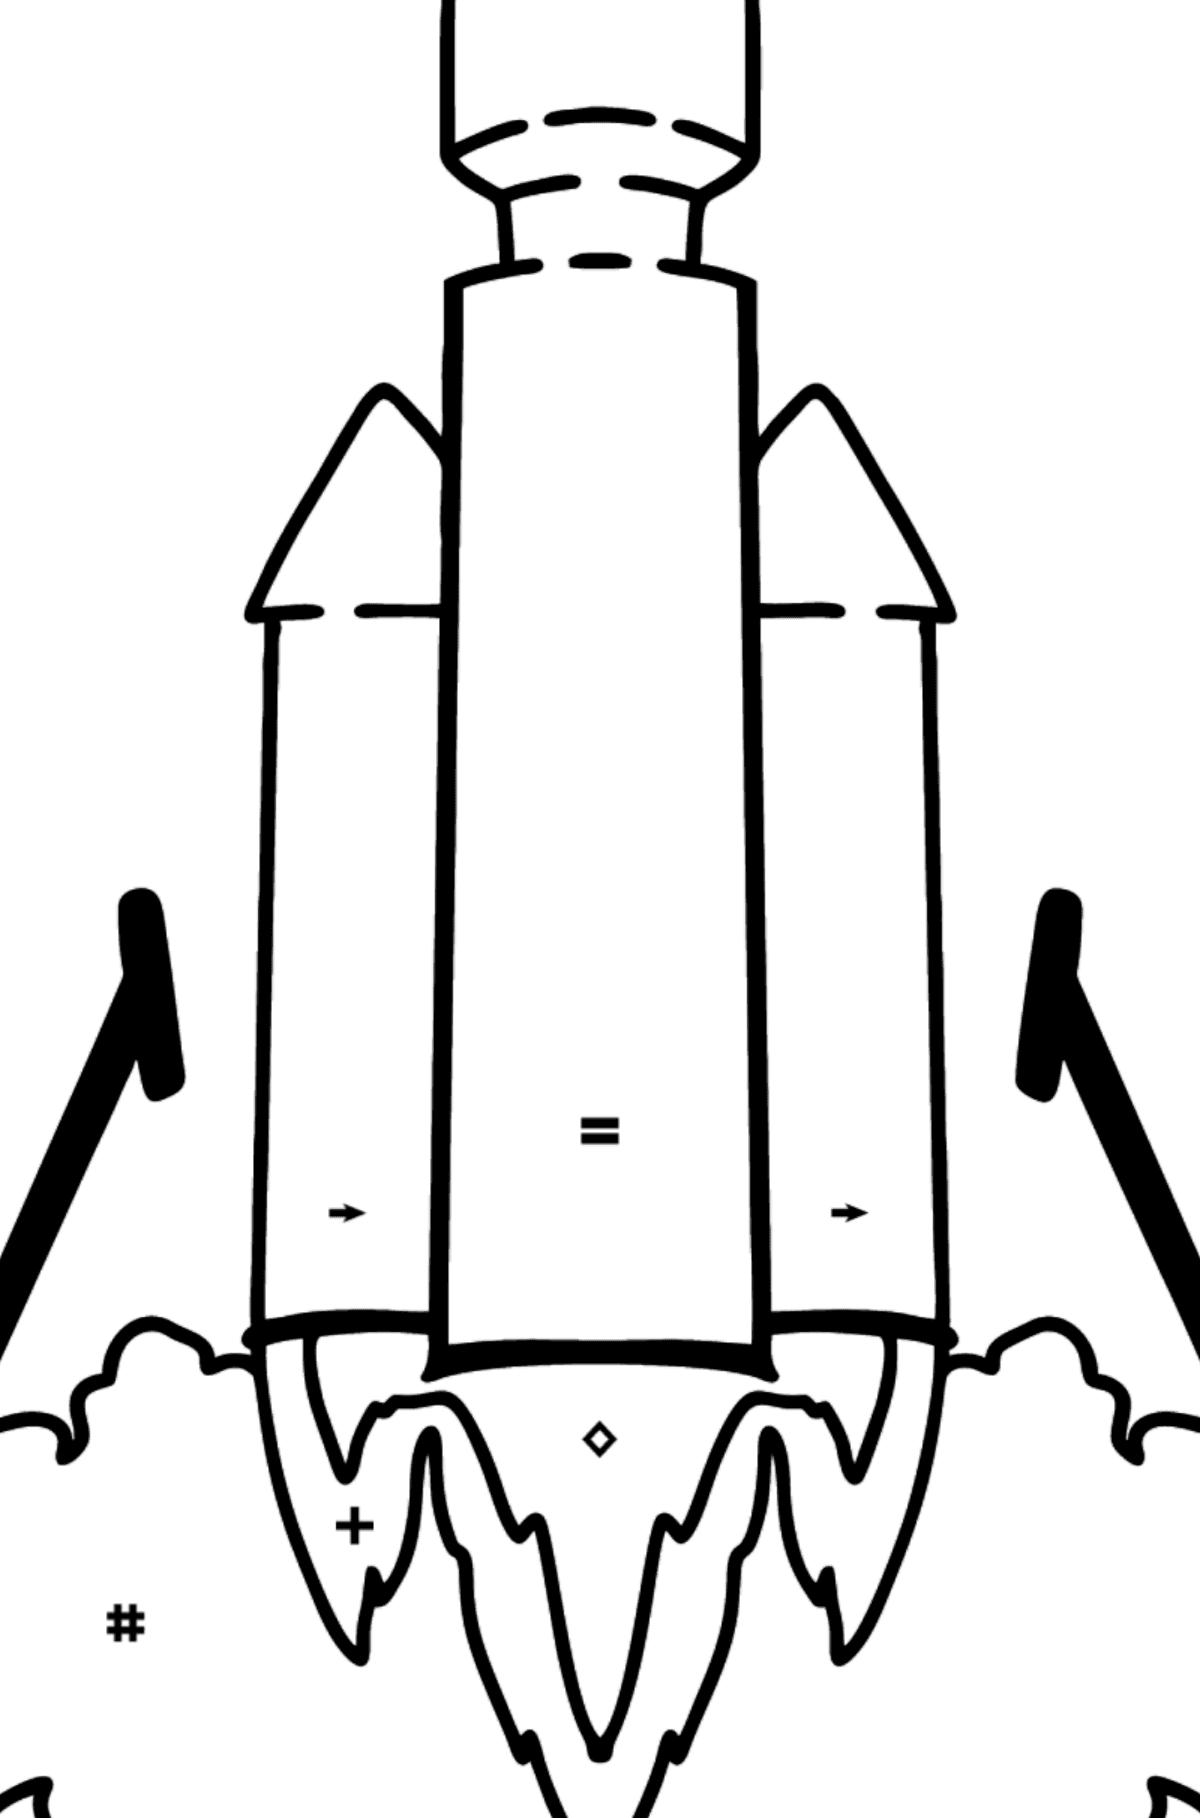 Rocket Launch coloring page - Coloring by Symbols and Geometric Shapes for Kids